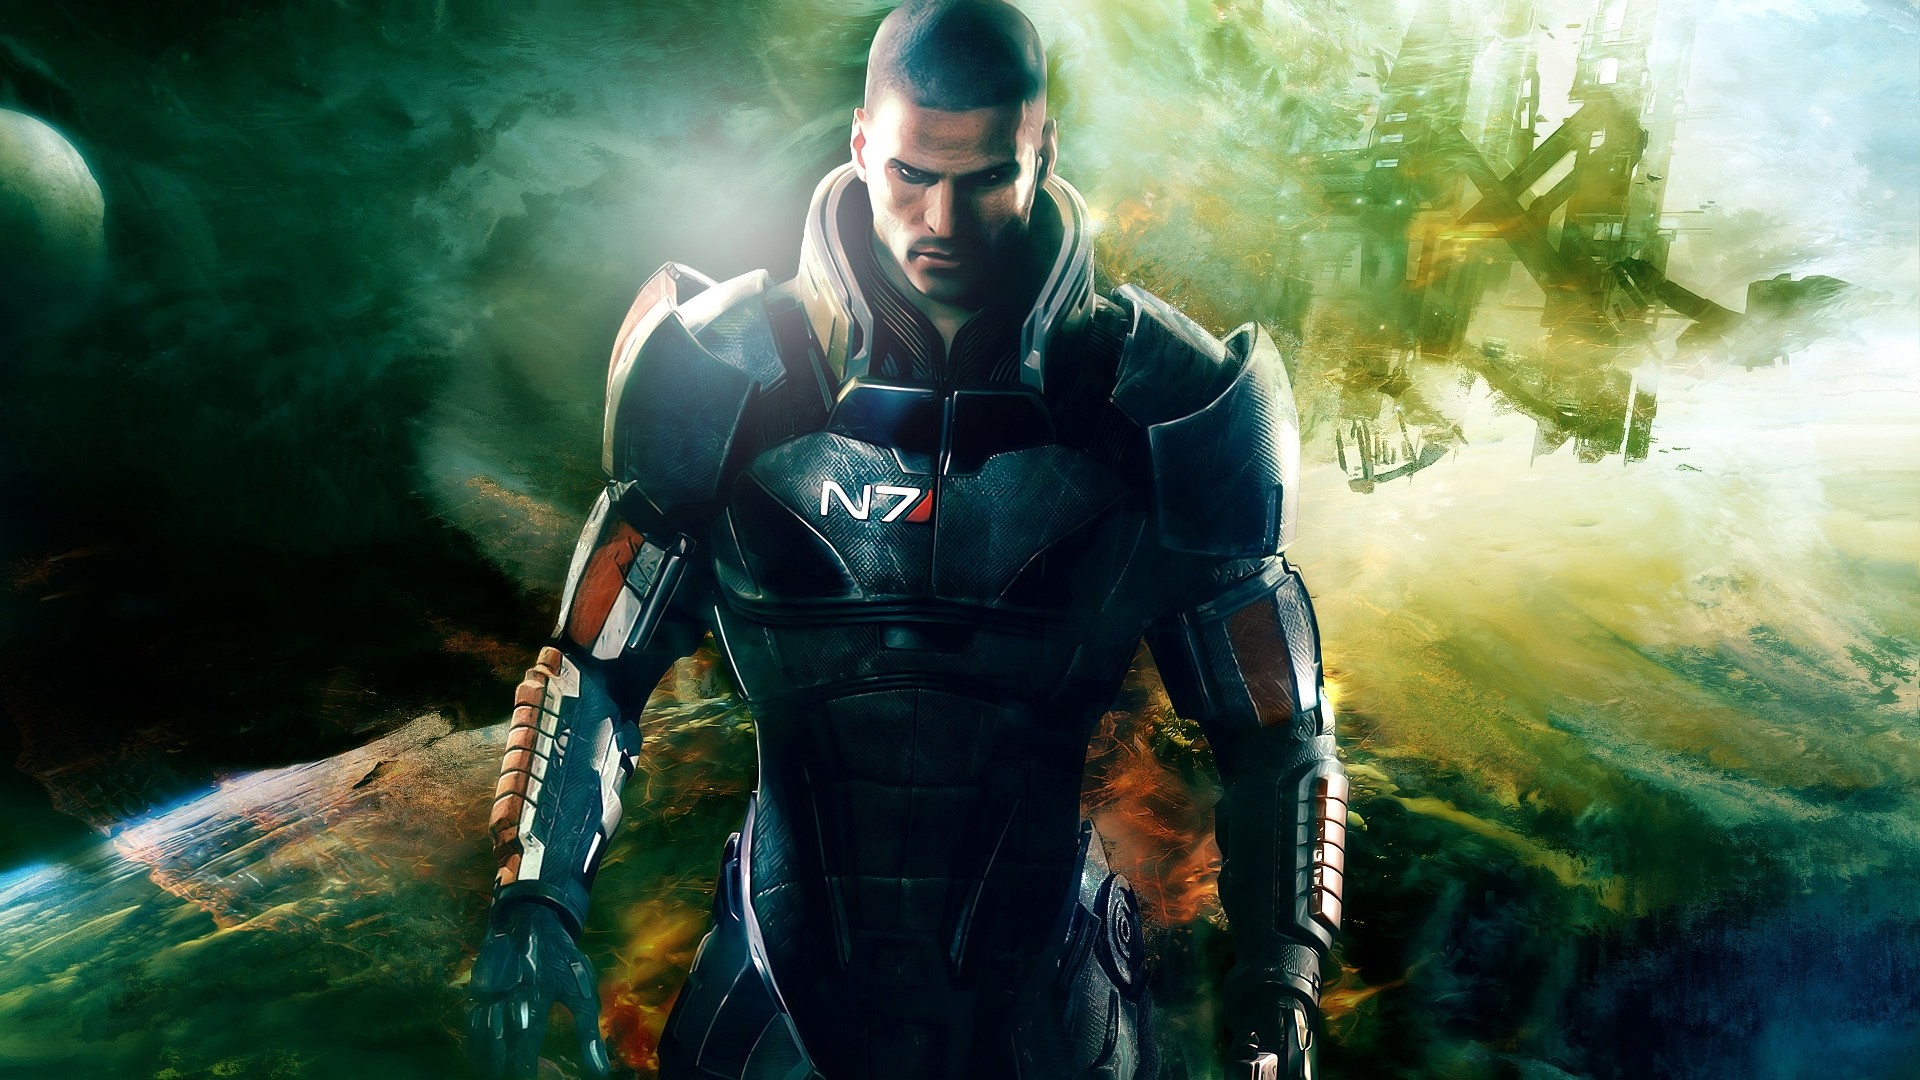 General 1920x1080 video games PC gaming Mass Effect Commander Shepard video game art science fiction EA Games Science Fiction Men men video game men